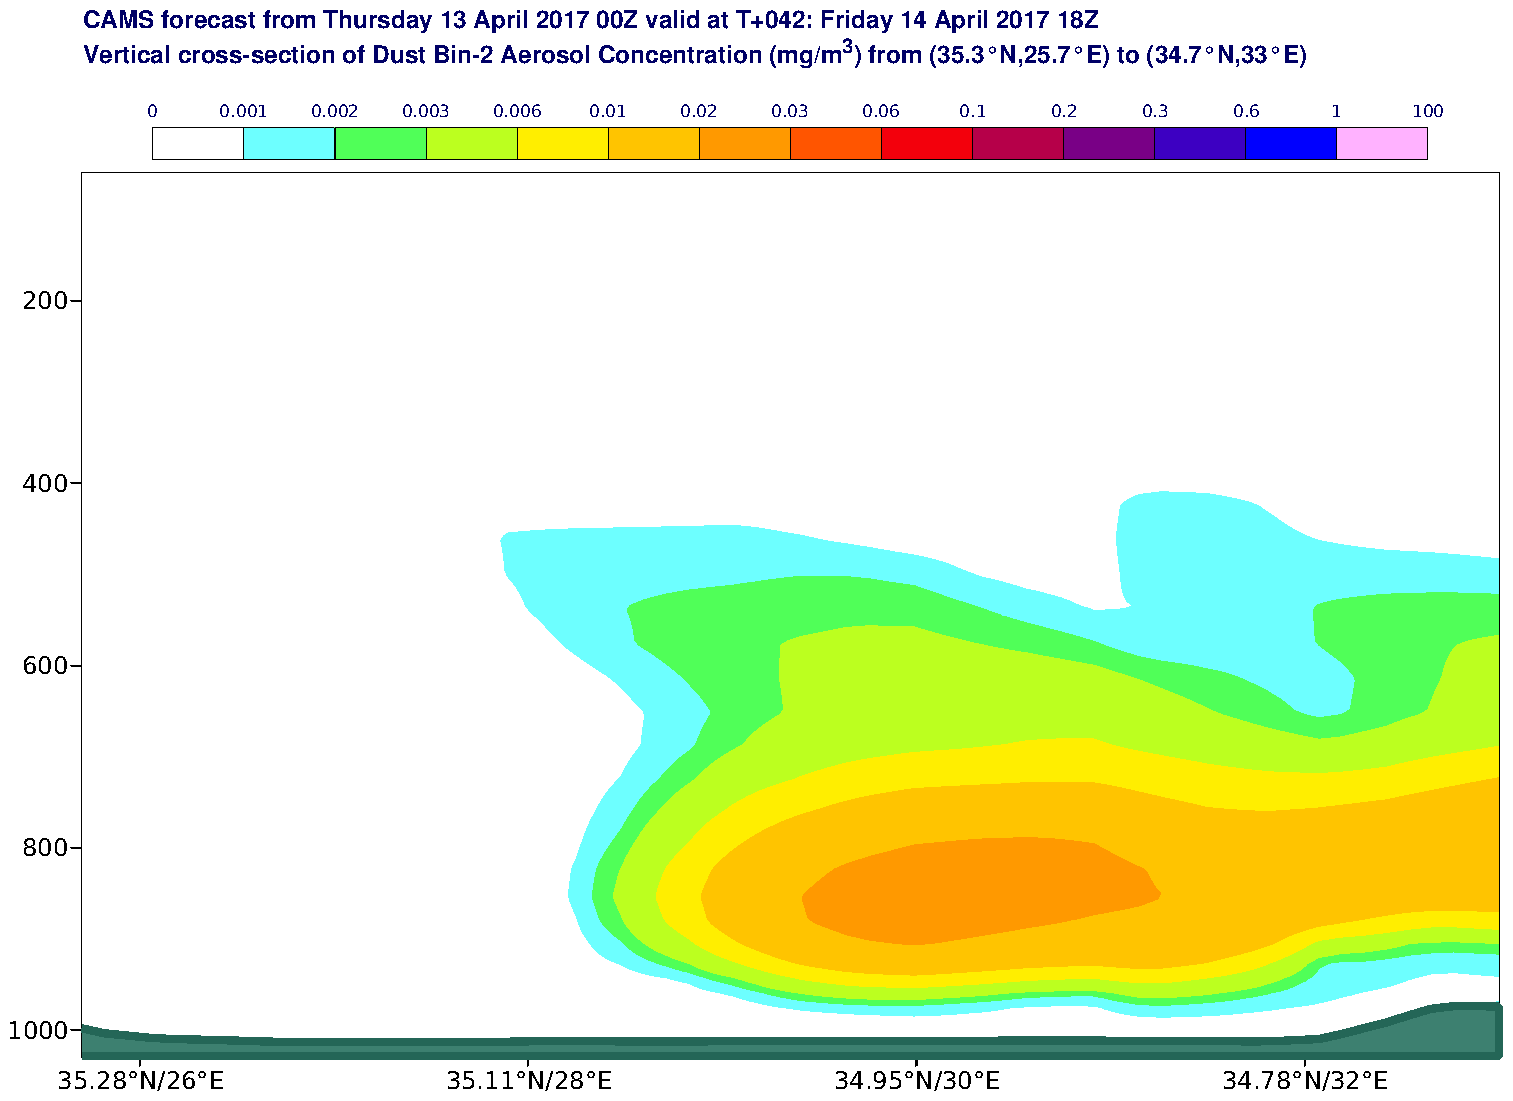 Vertical cross-section of Dust Bin-2 Aerosol Concentration (mg/m3) valid at T42 - 2017-04-14 18:00